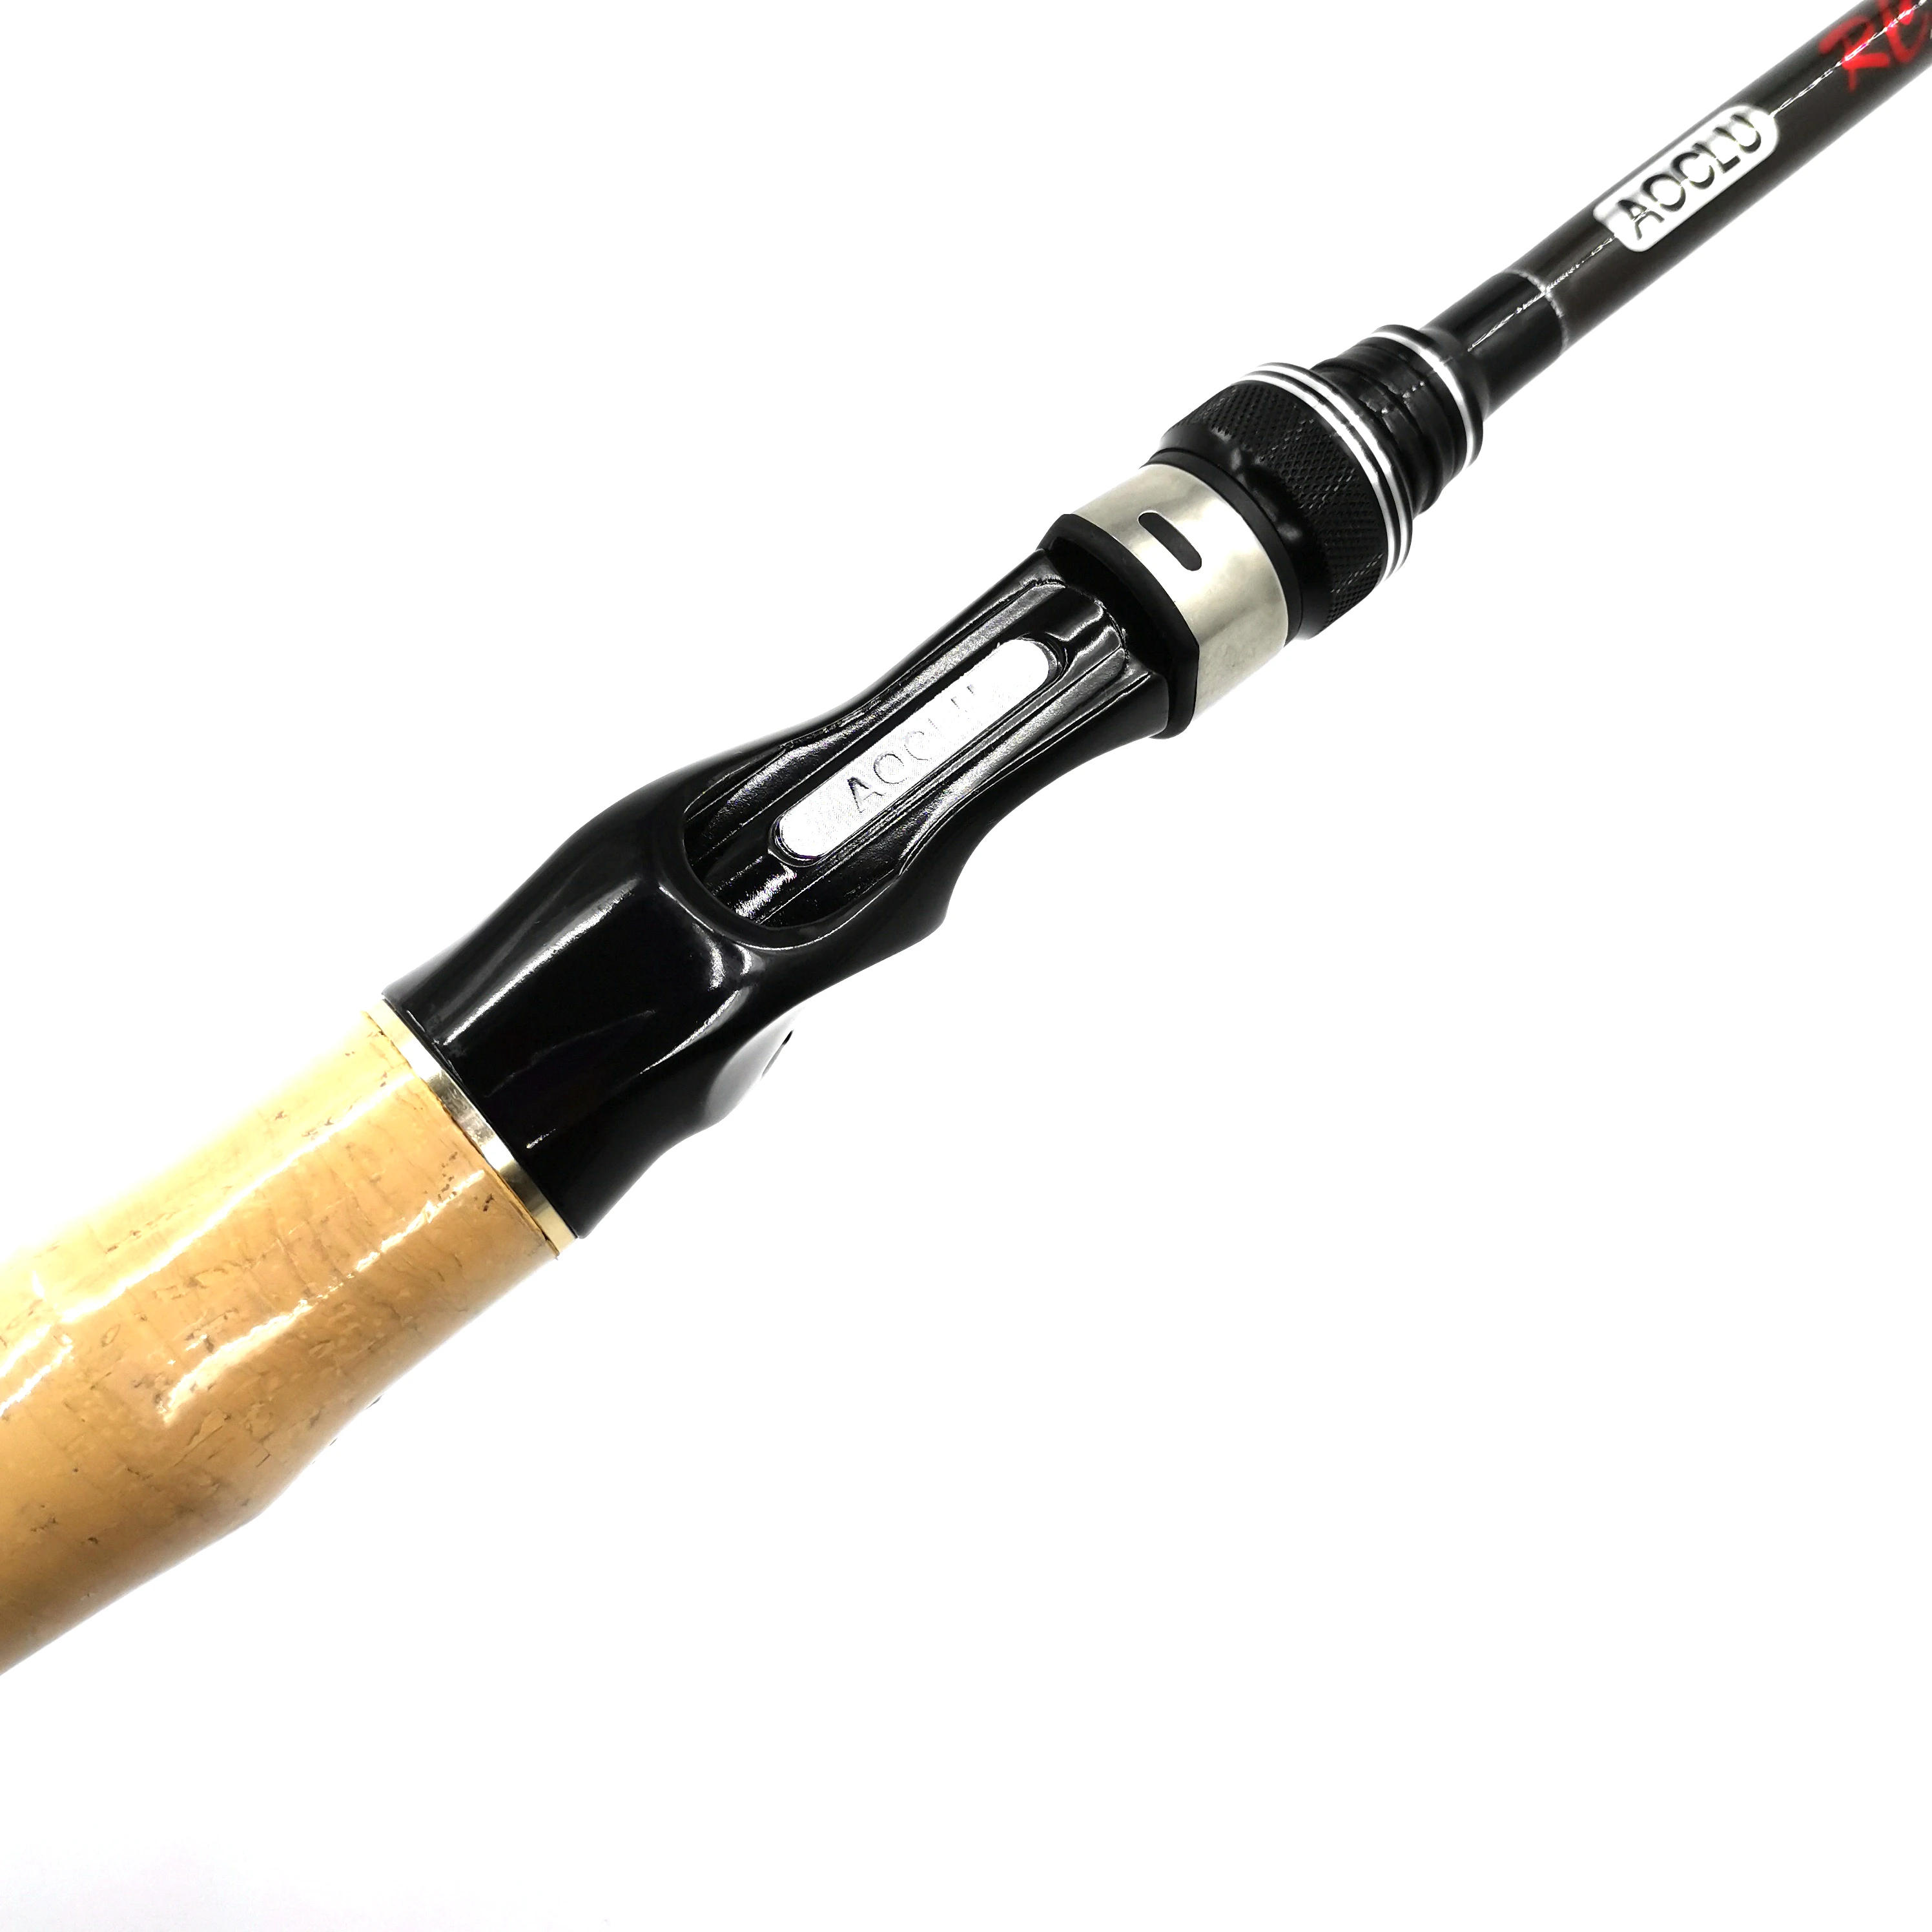 

AOCLU Qualified Fishing Rod IM6 100% 24T carbon 3 Sections Spinning and 7' ML Baitcasting For Saltwater/Freshwater Fishing